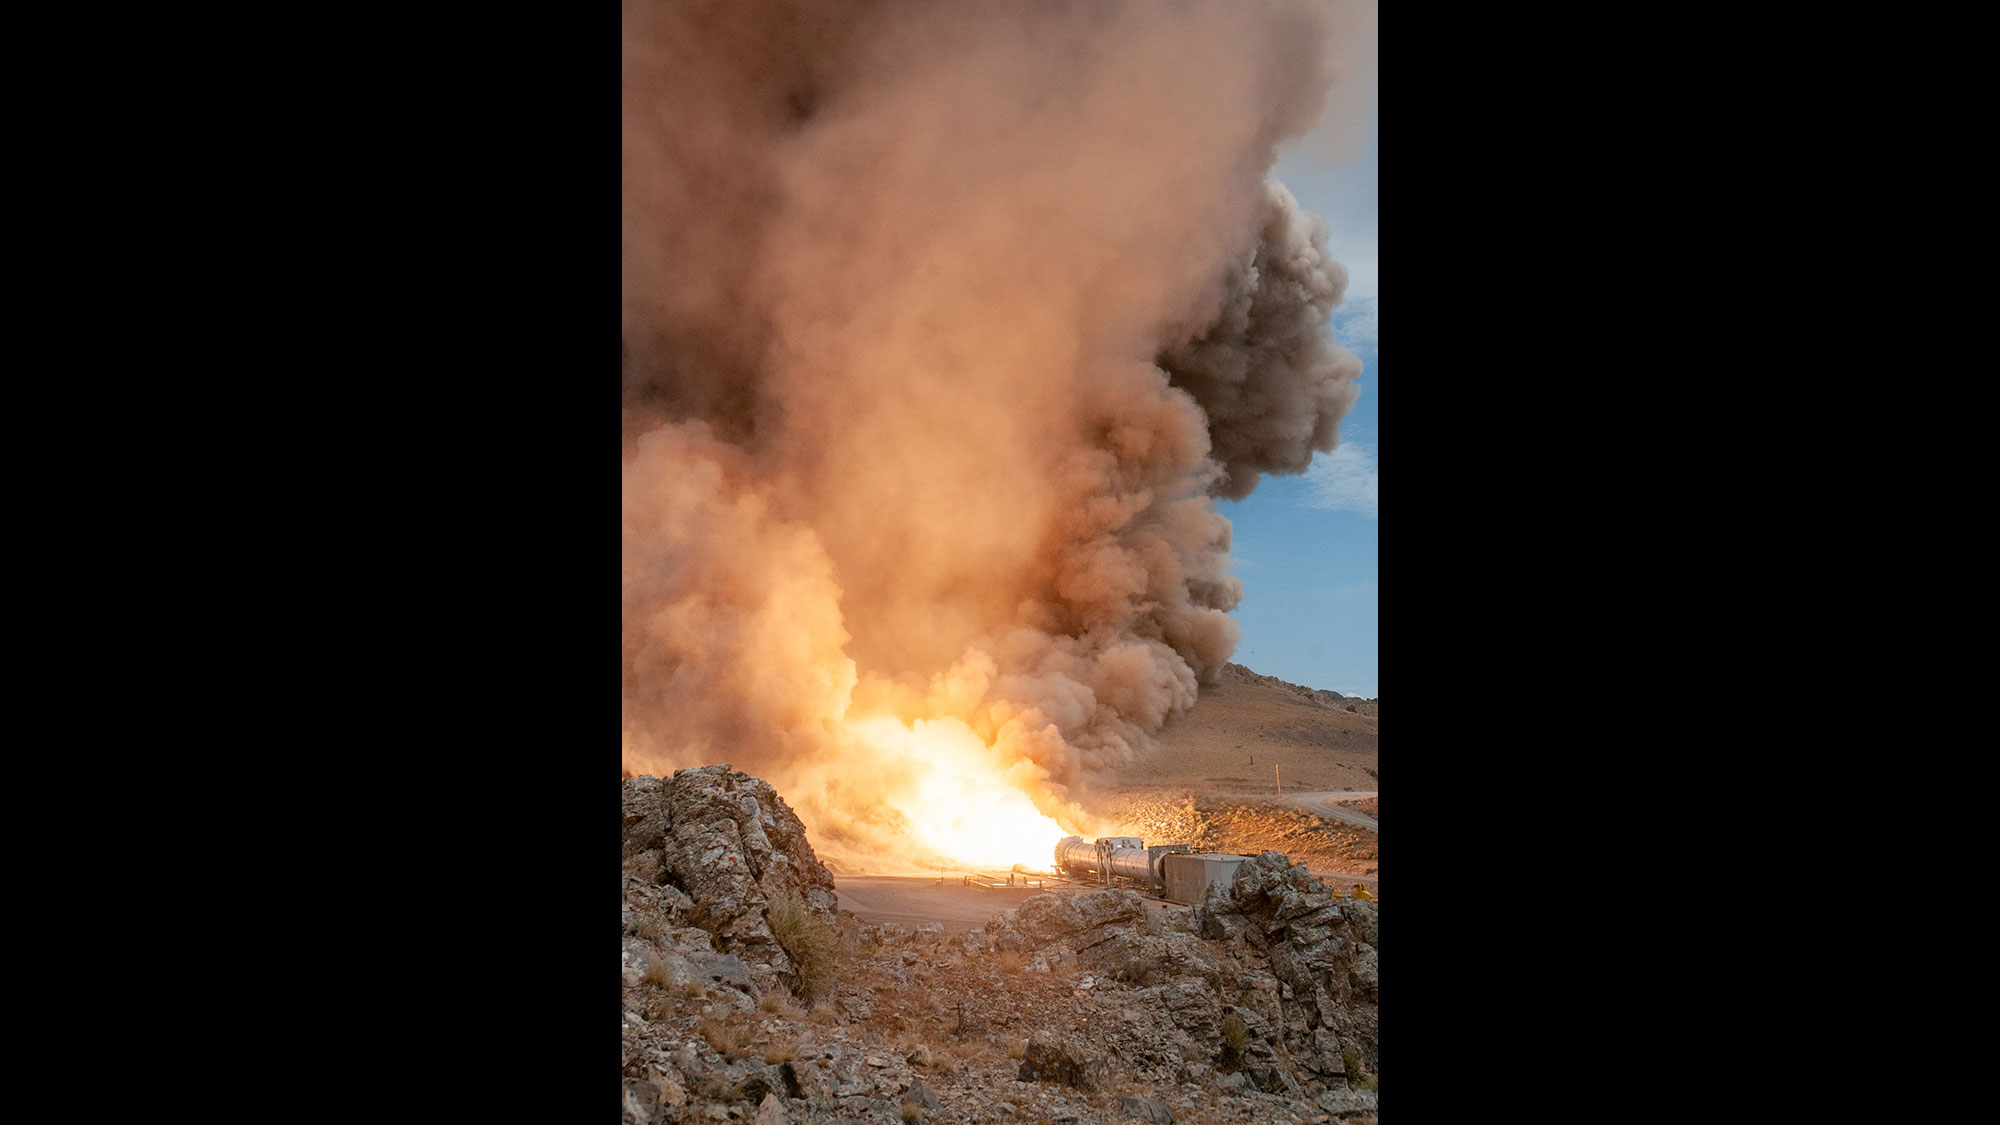 rocket test in desert with smoke in the sky